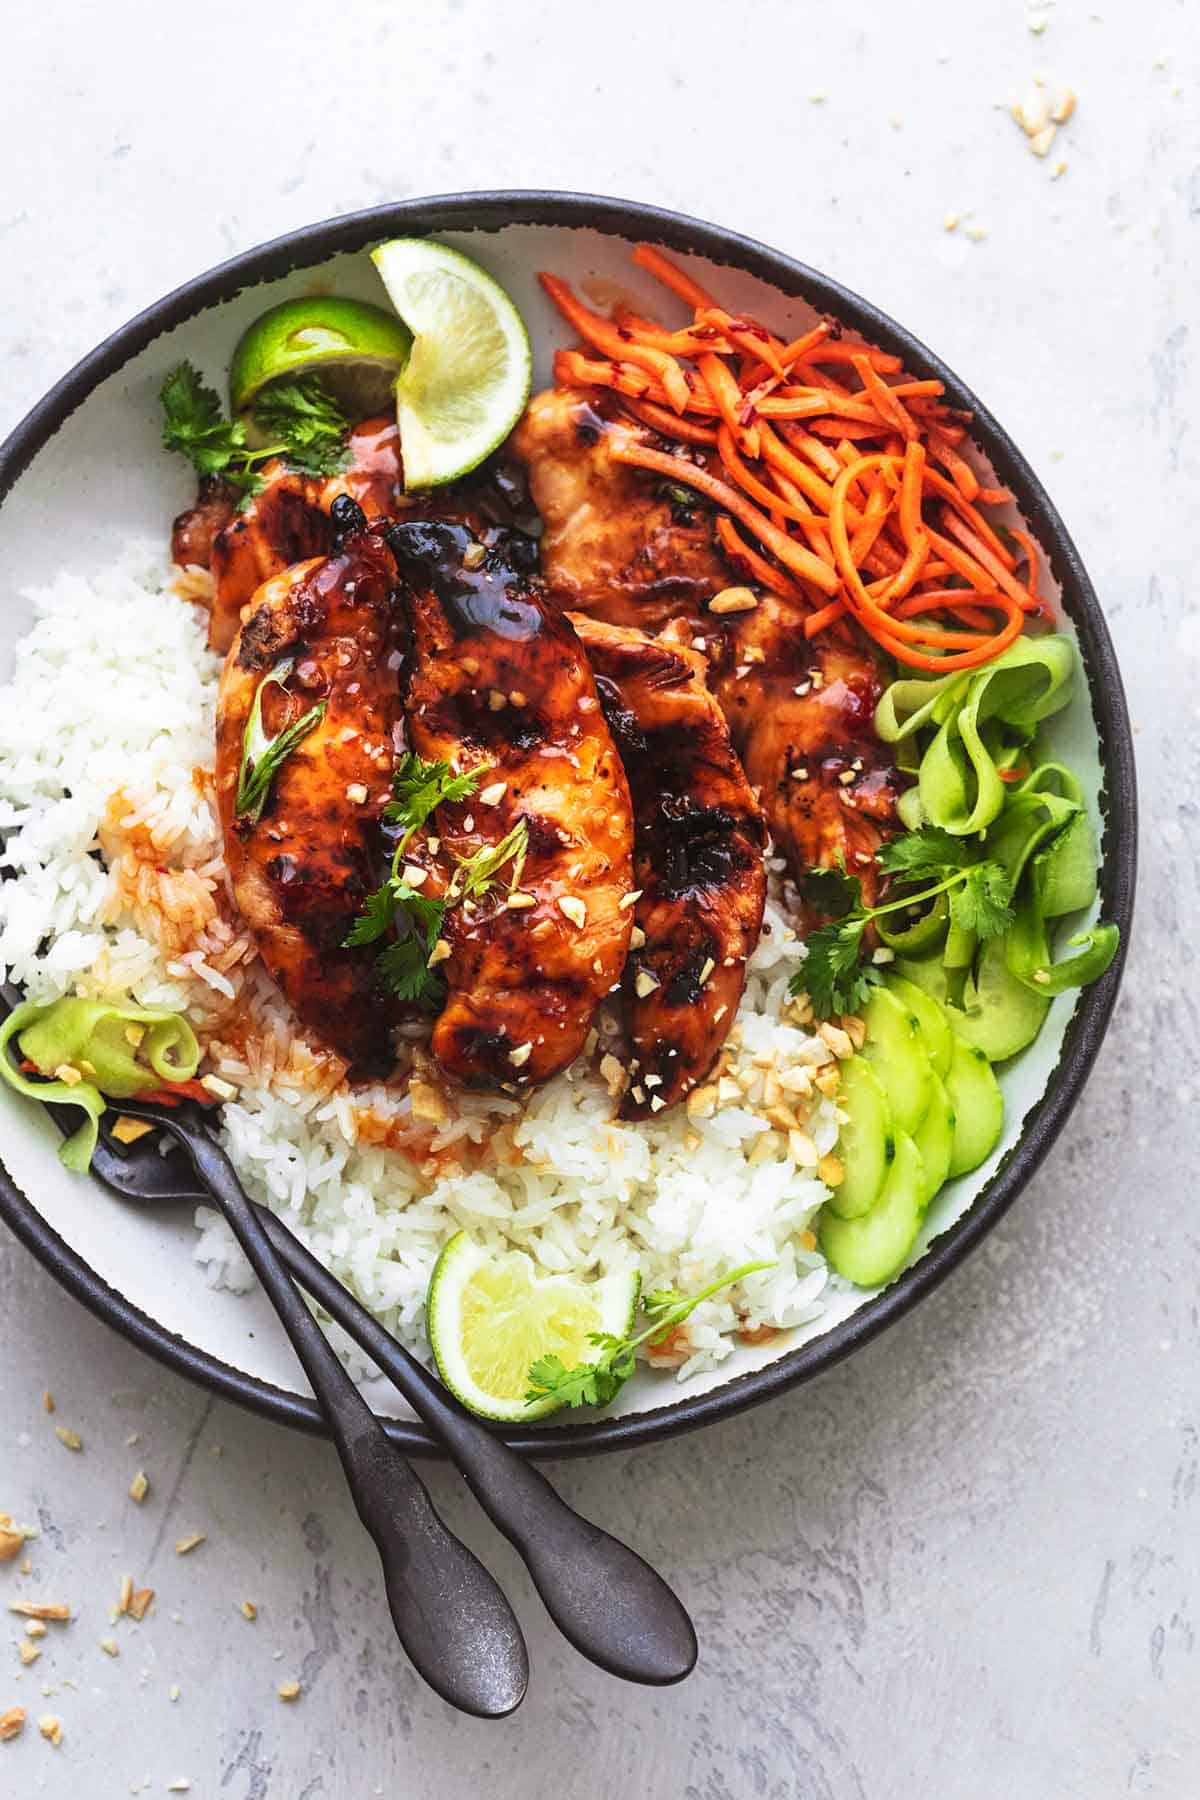 Hot and Spicy Chicken Fillet Recipe